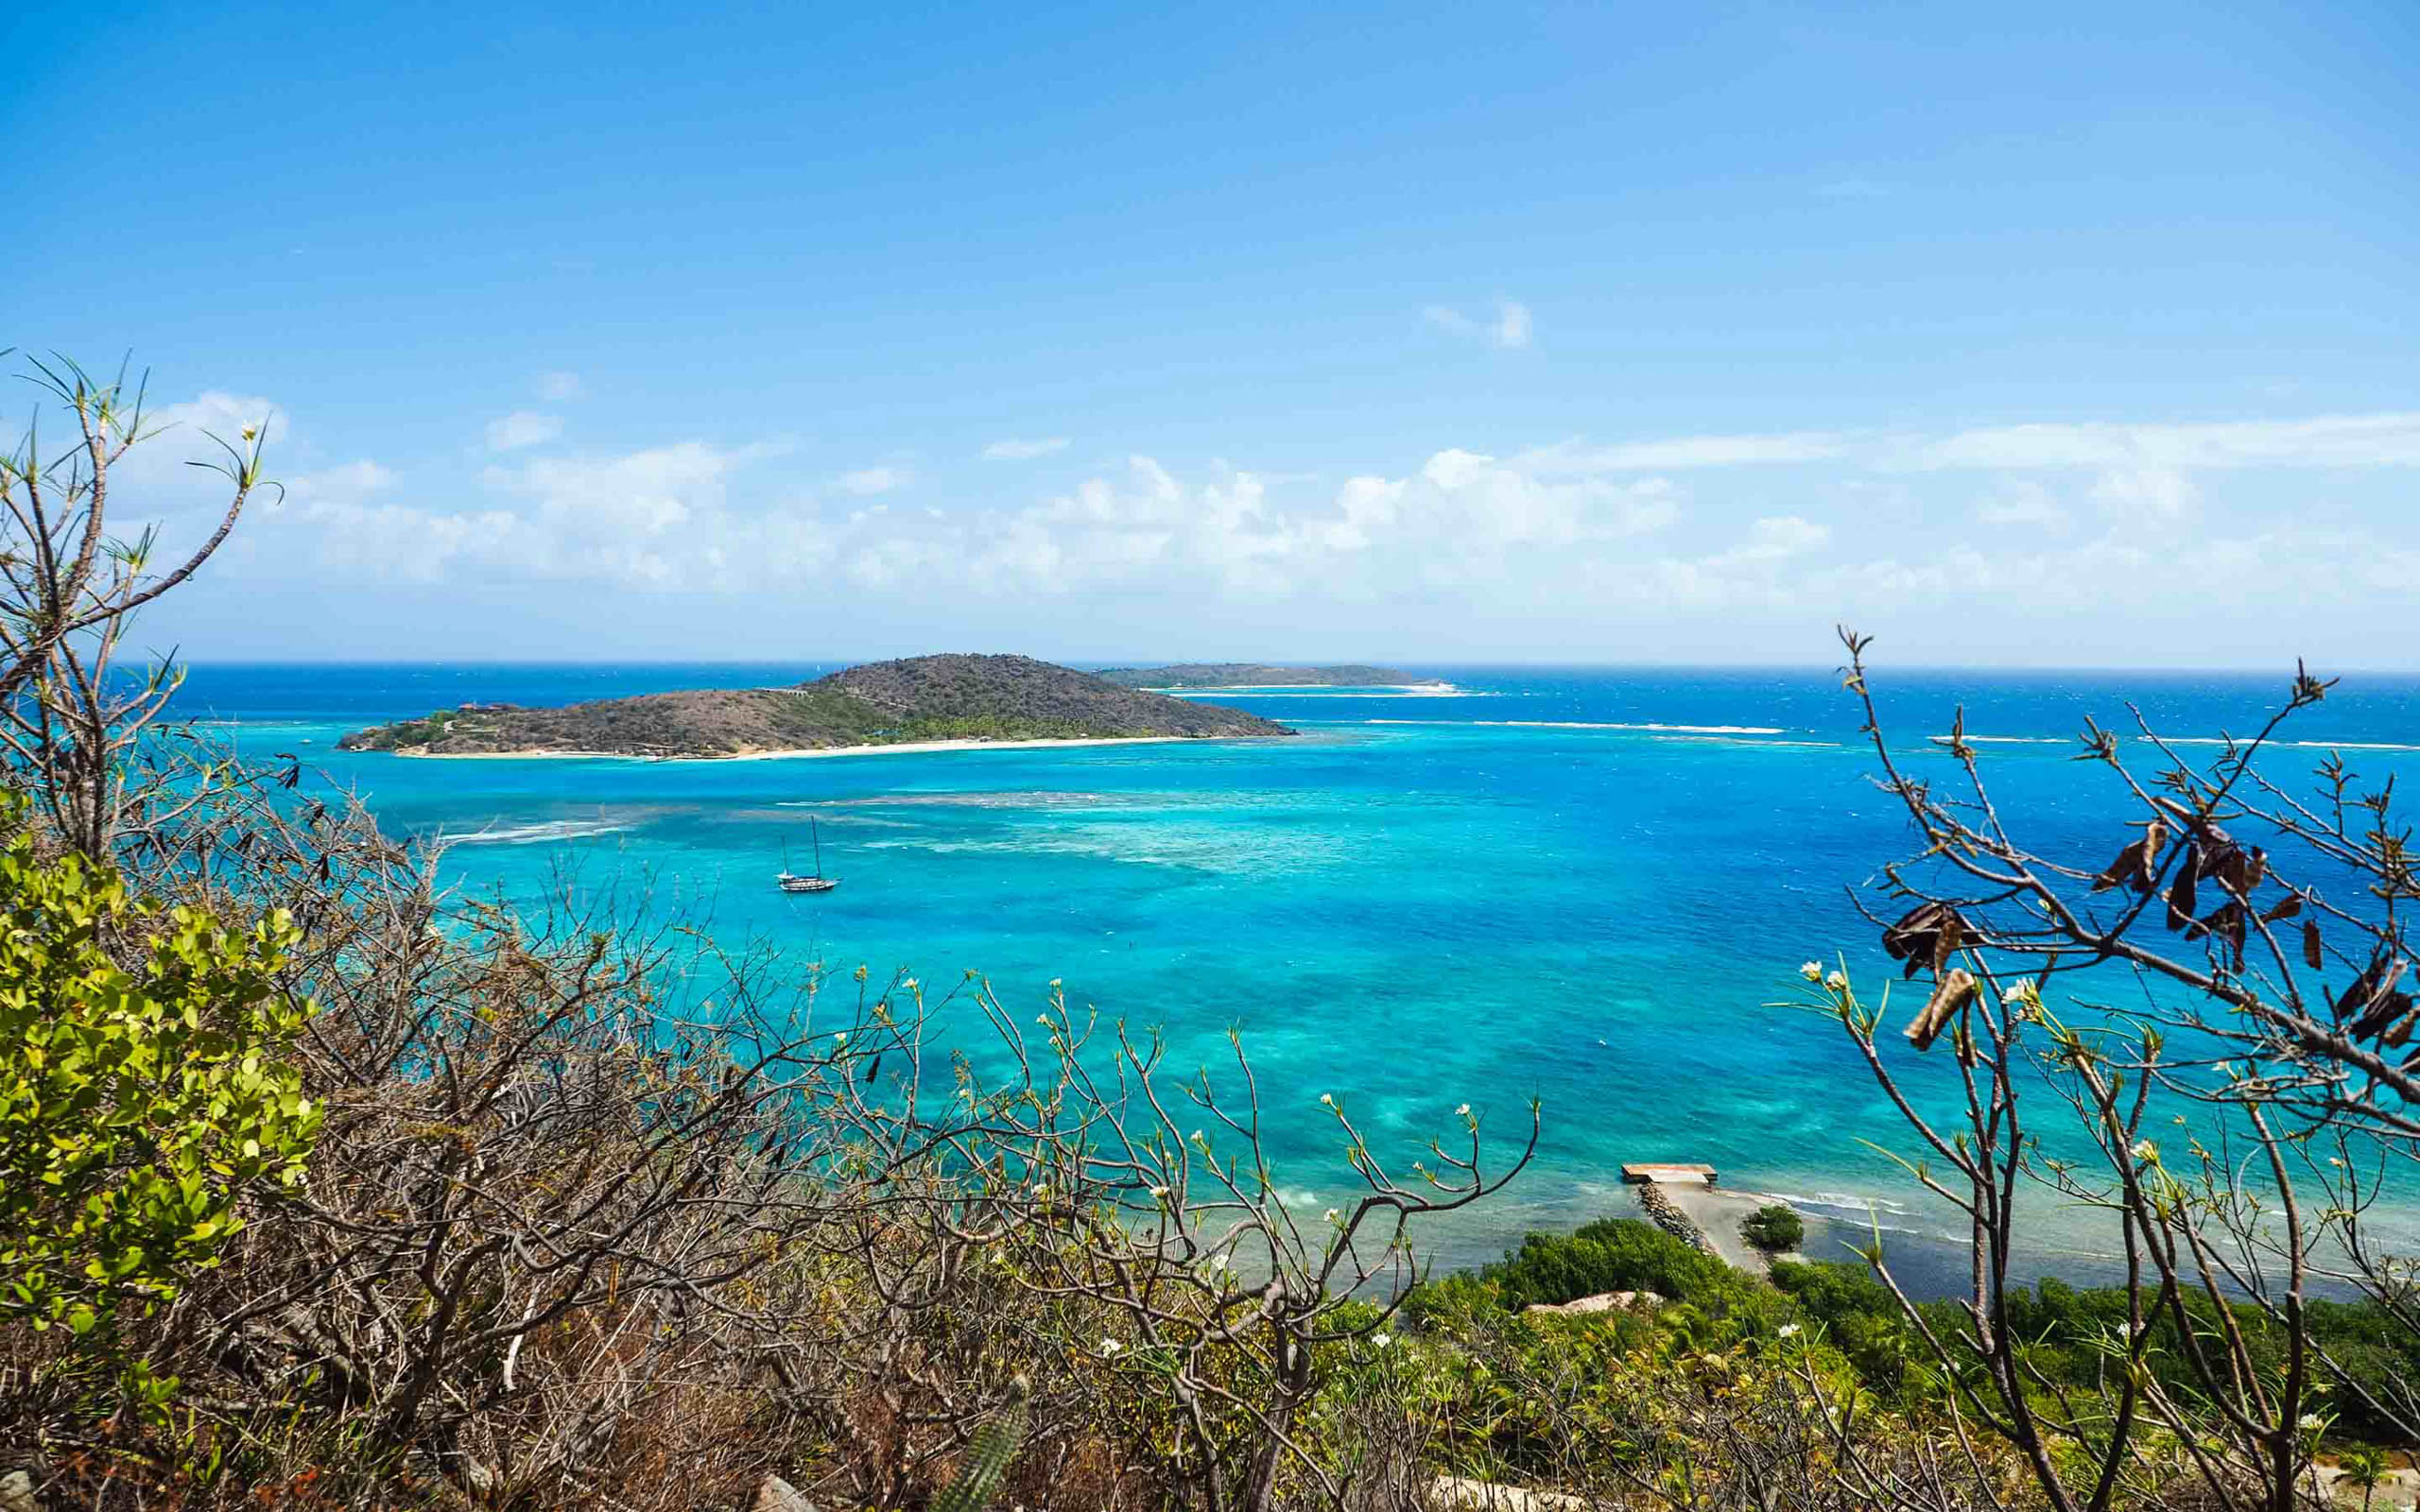 A view from a hill overlooking an island and blue water.